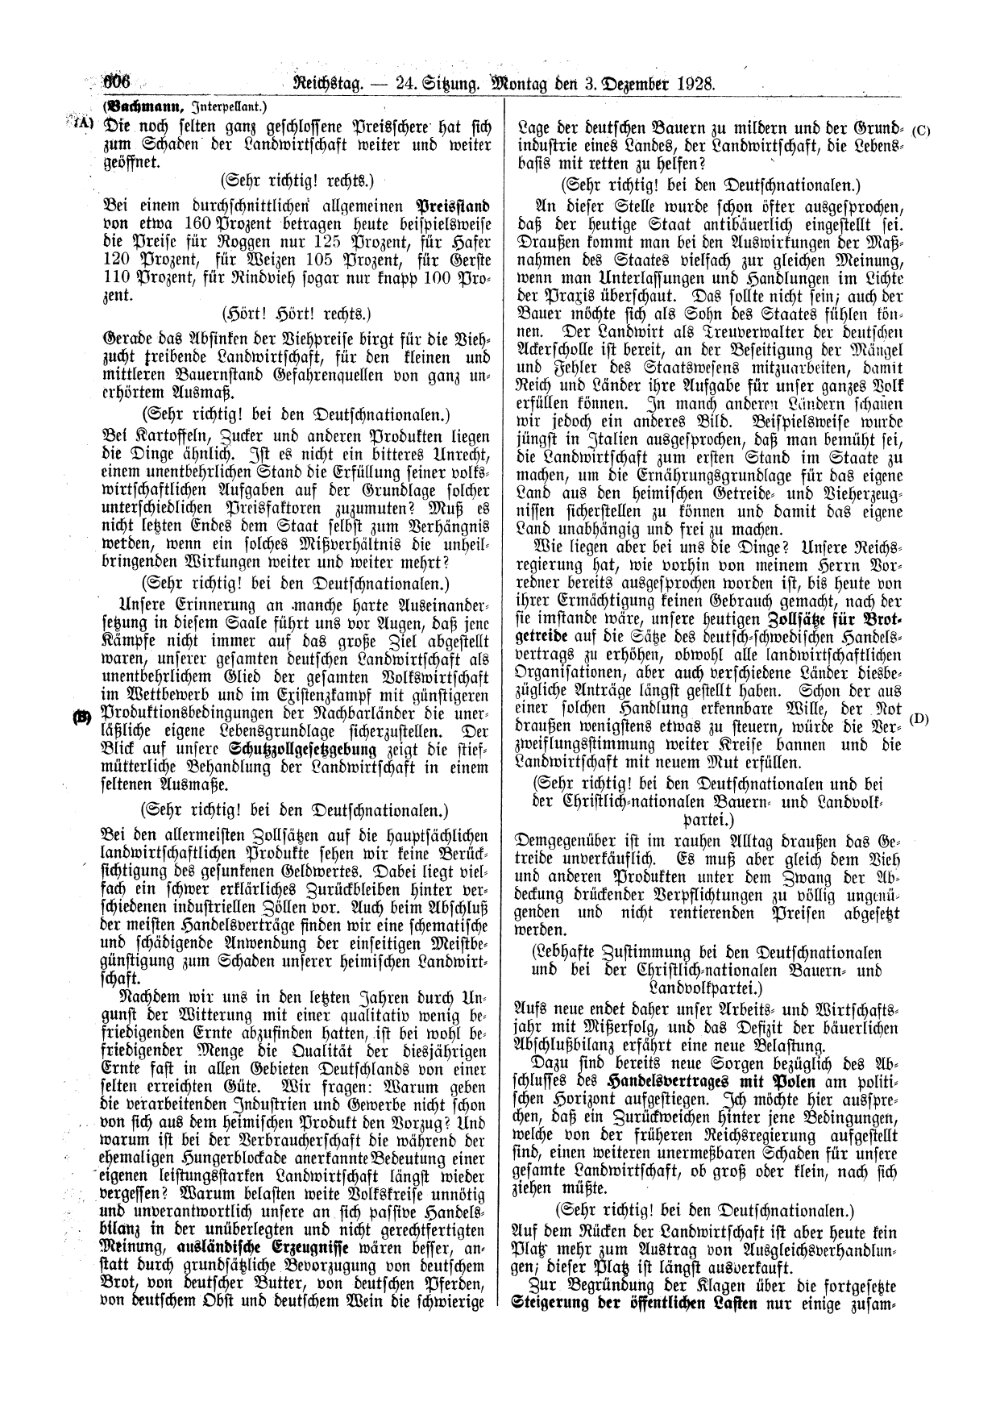 Scan of page 606